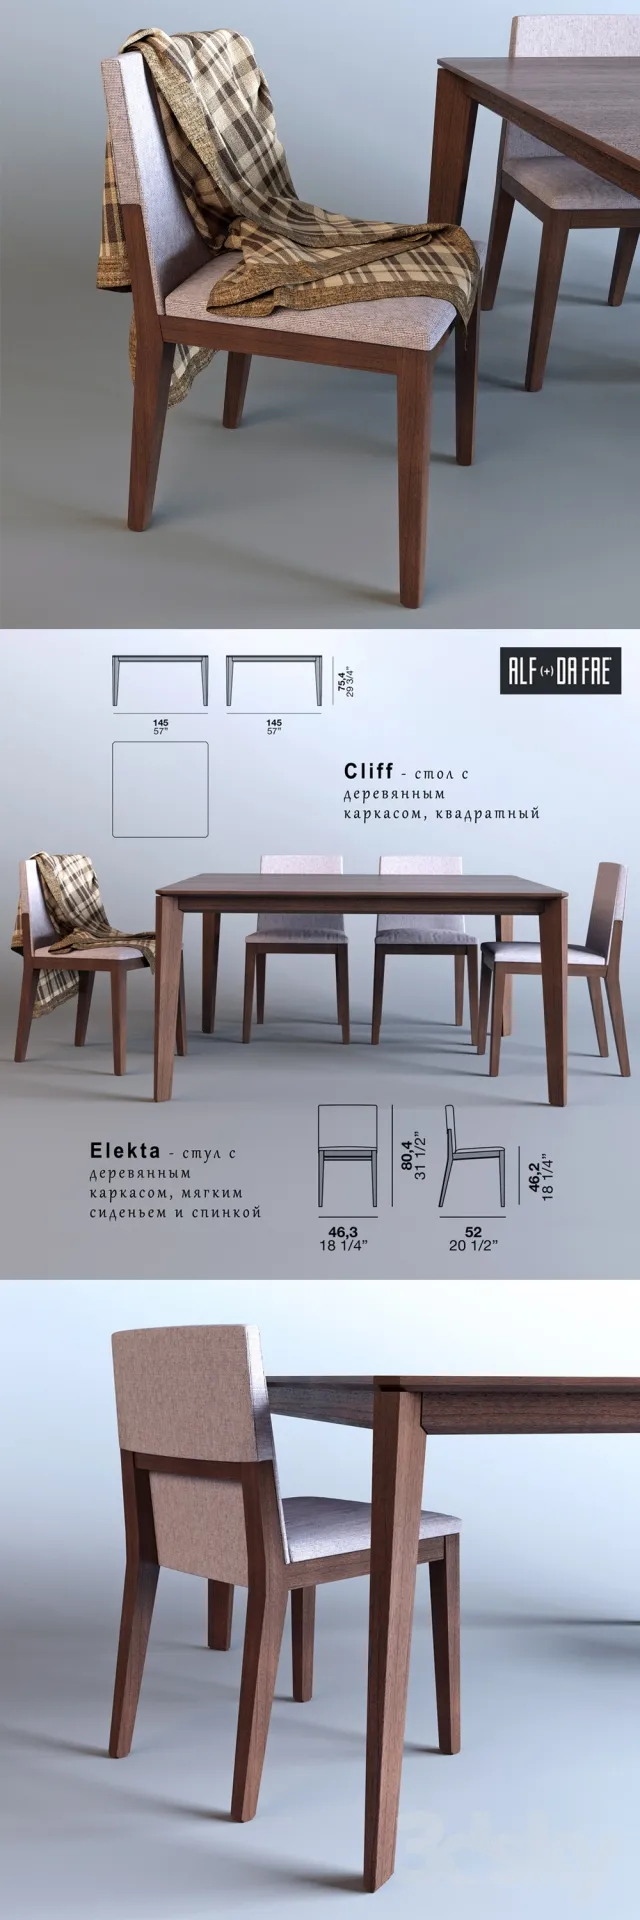 FURNITURE – TABLE AND CHAIRS 3D MODELS – 264